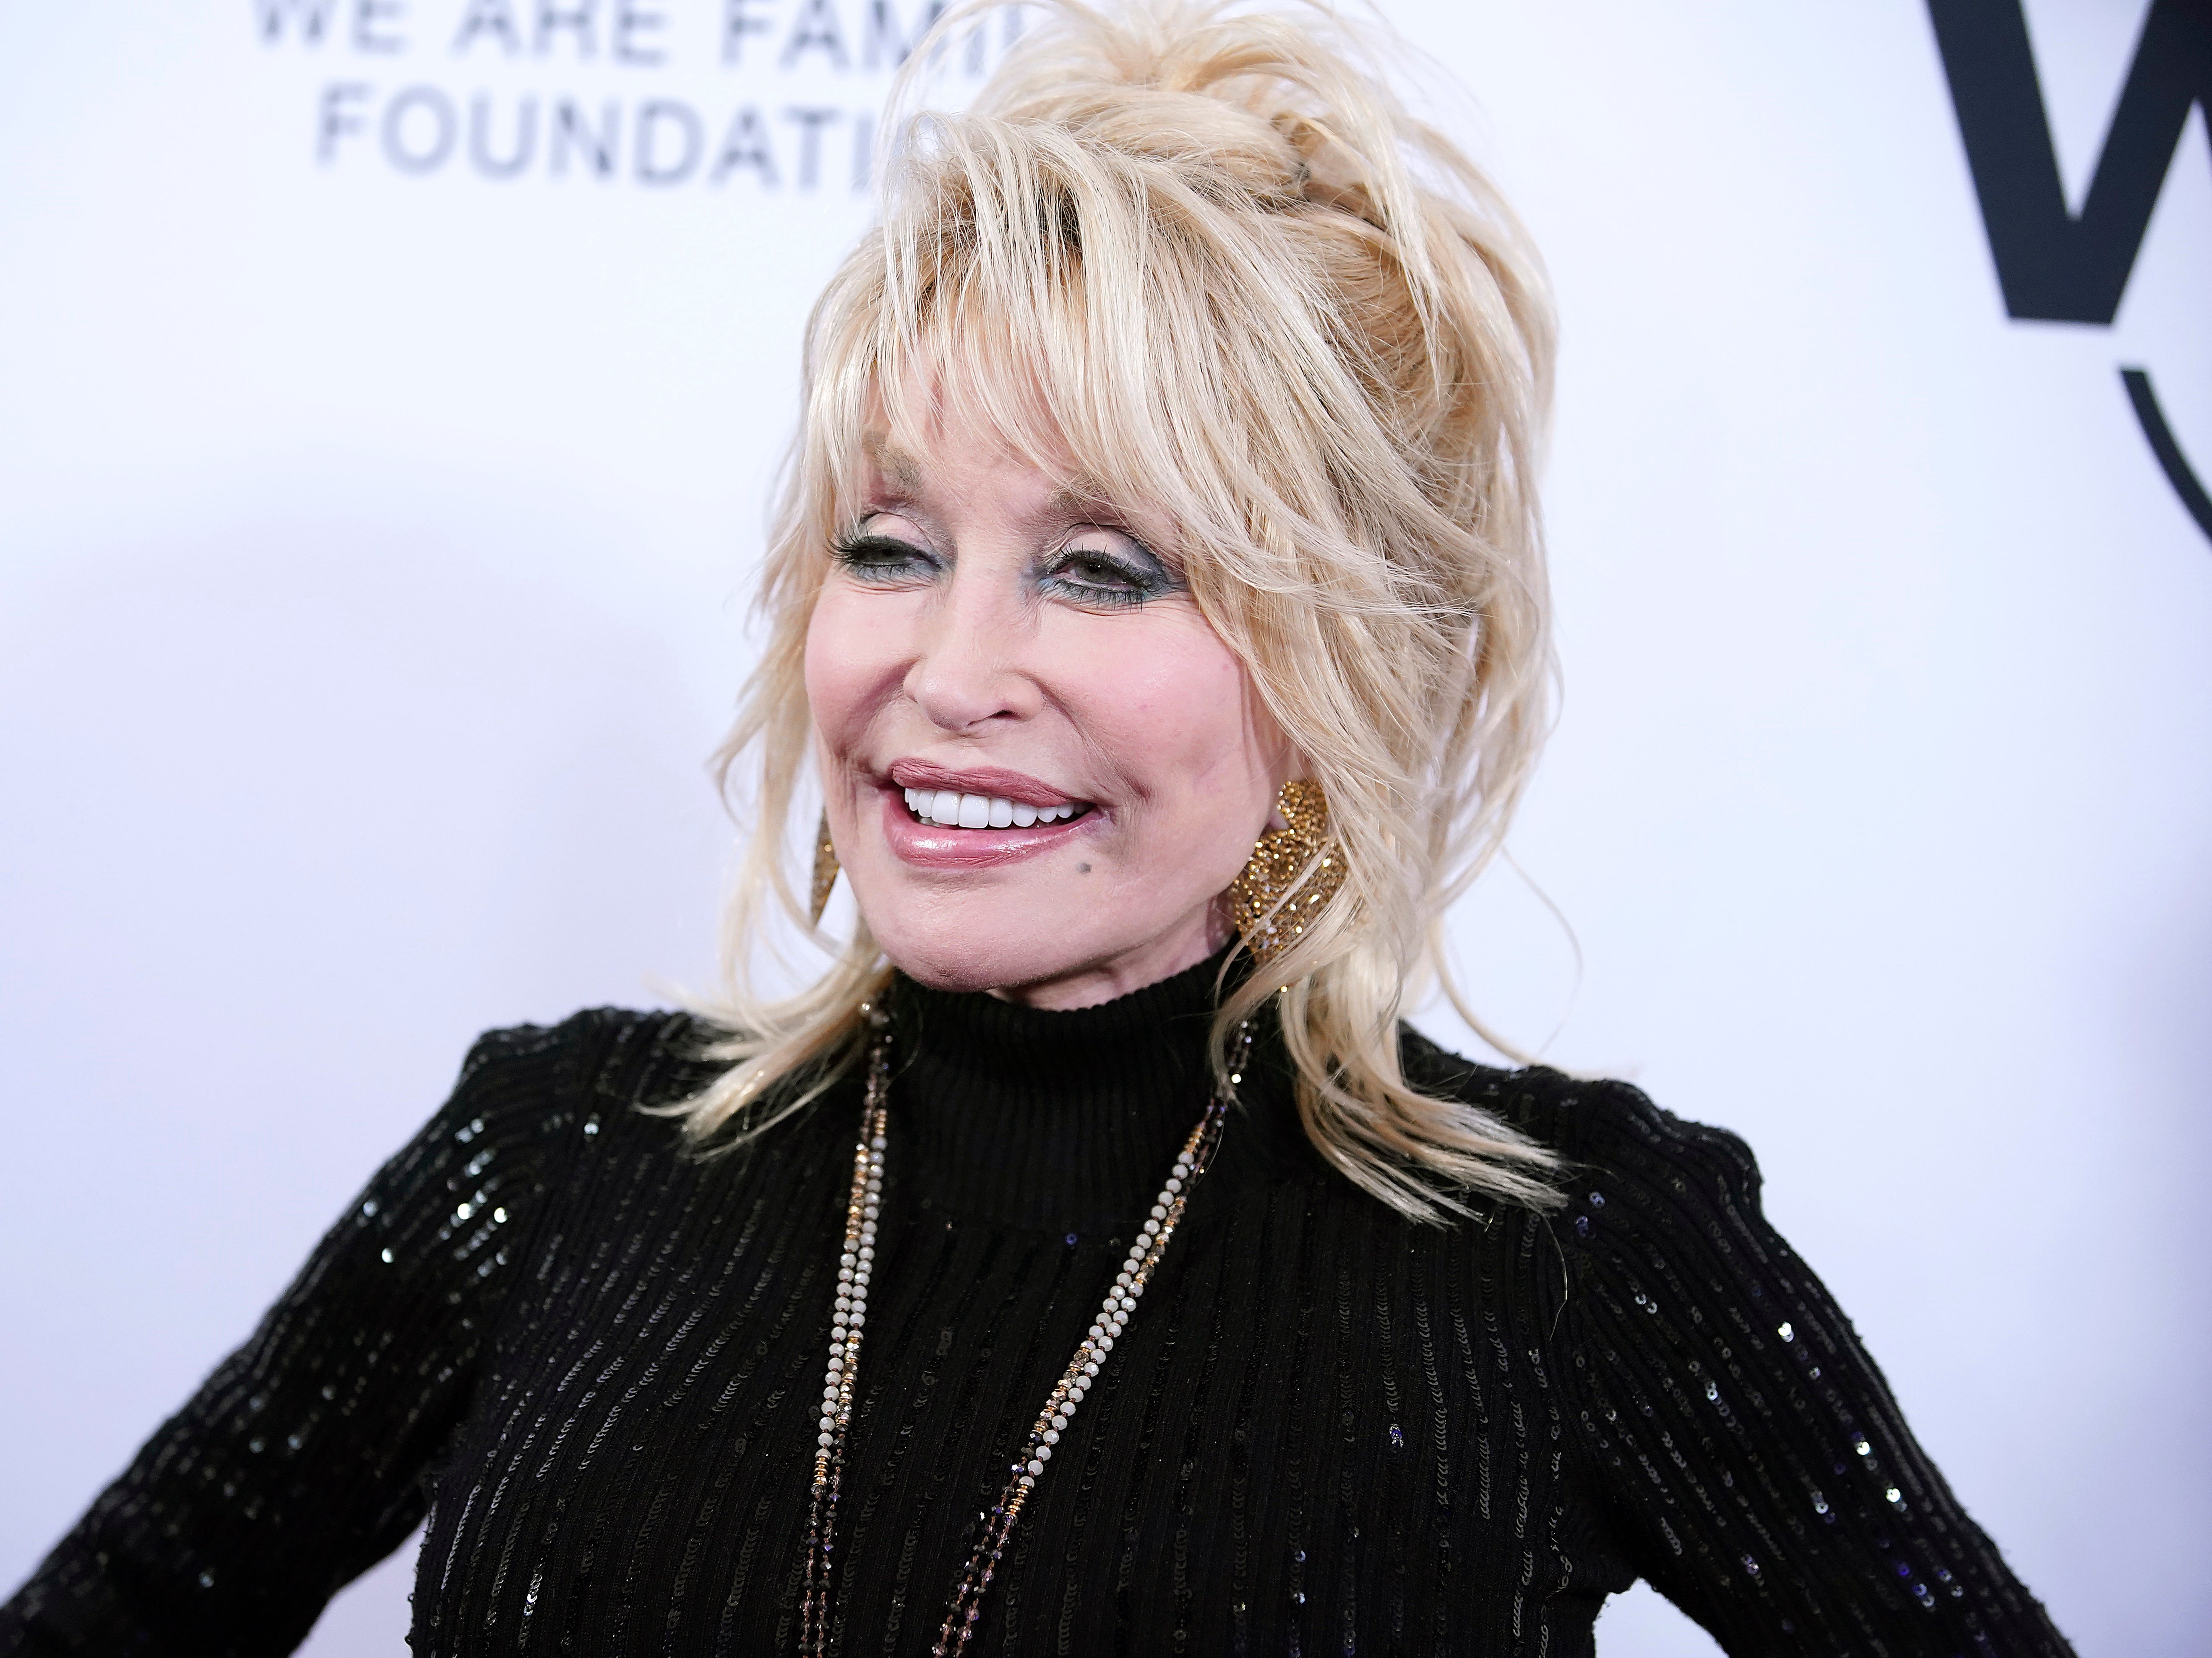 Singer Dolly Parton helped to fund the development of the Moderna vaccine